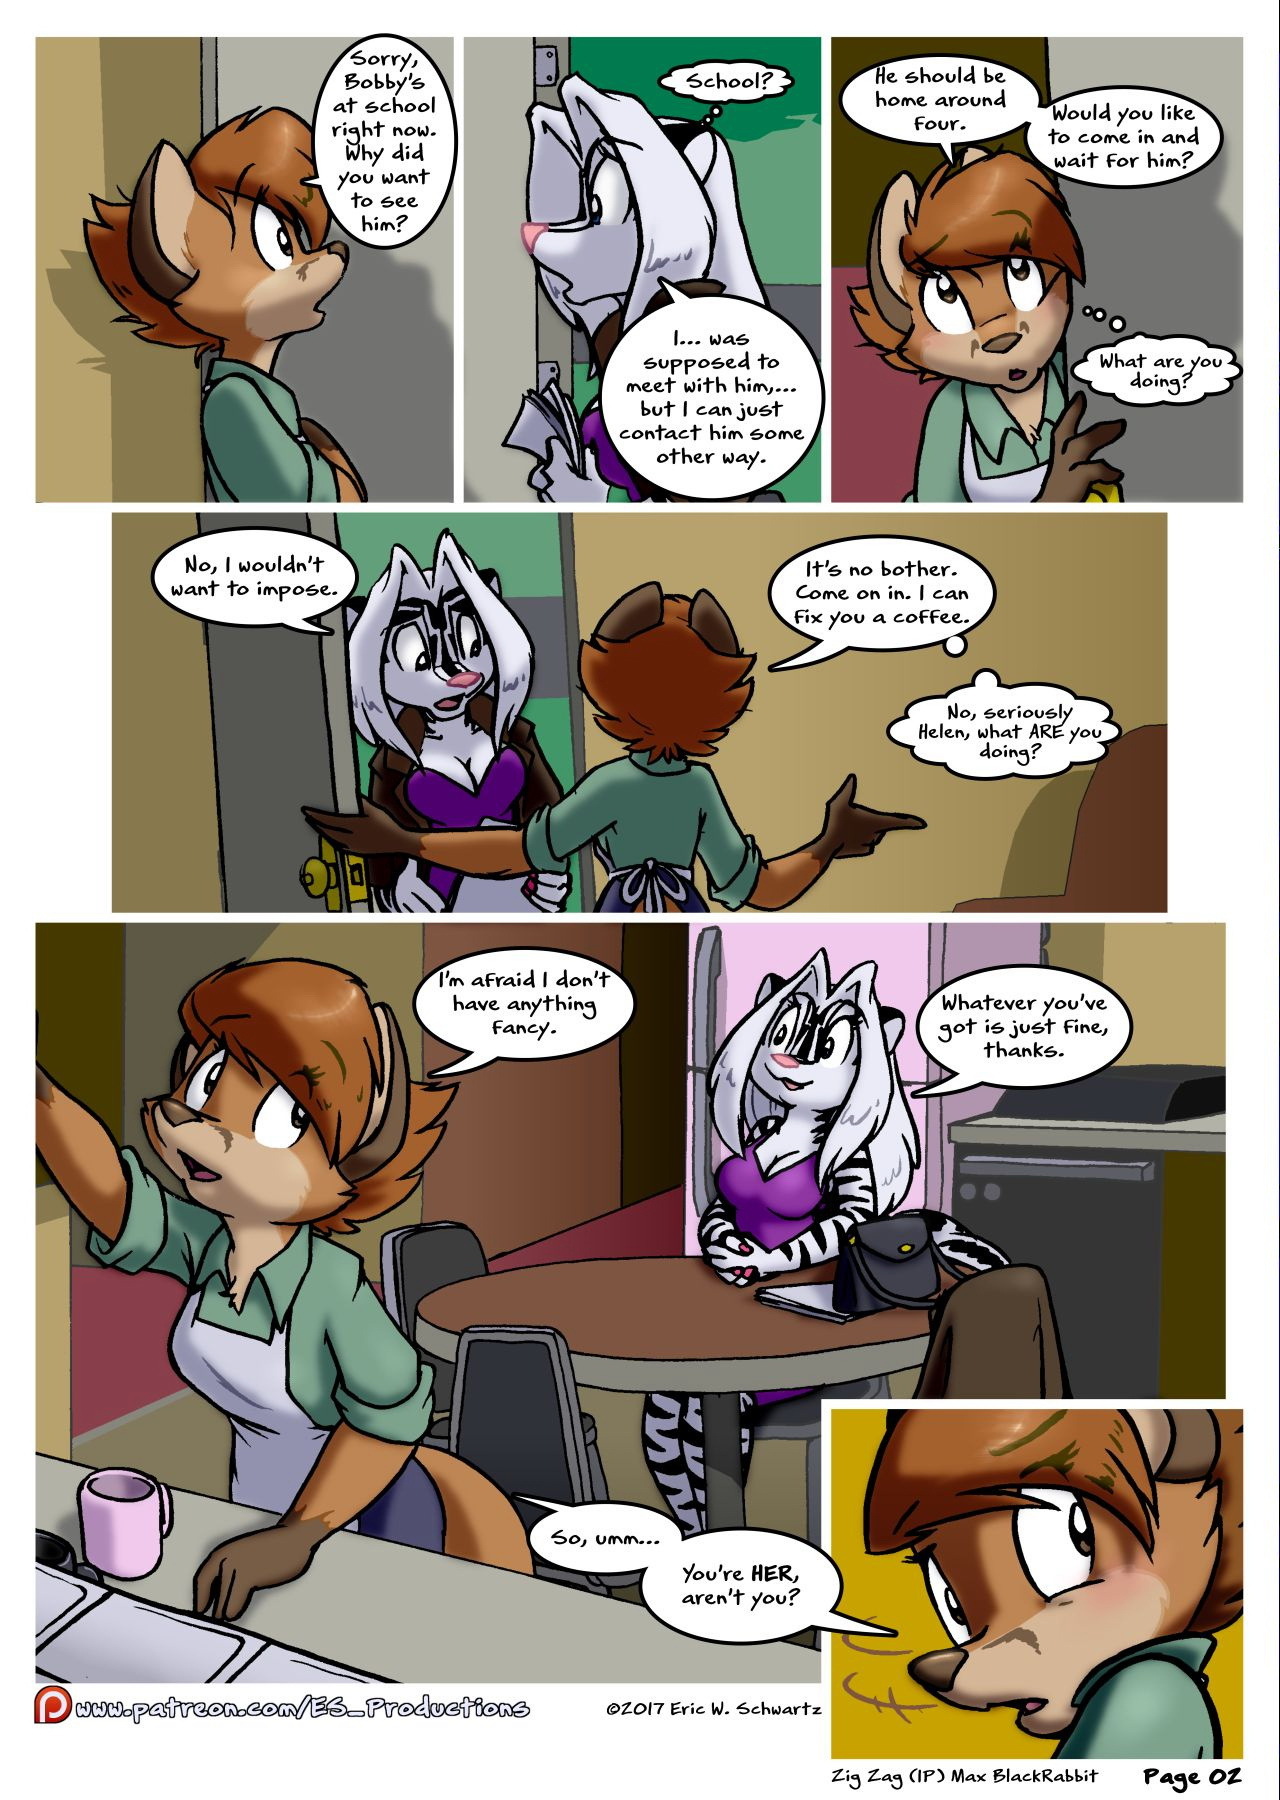 Adventure Begins at Home - Page 3